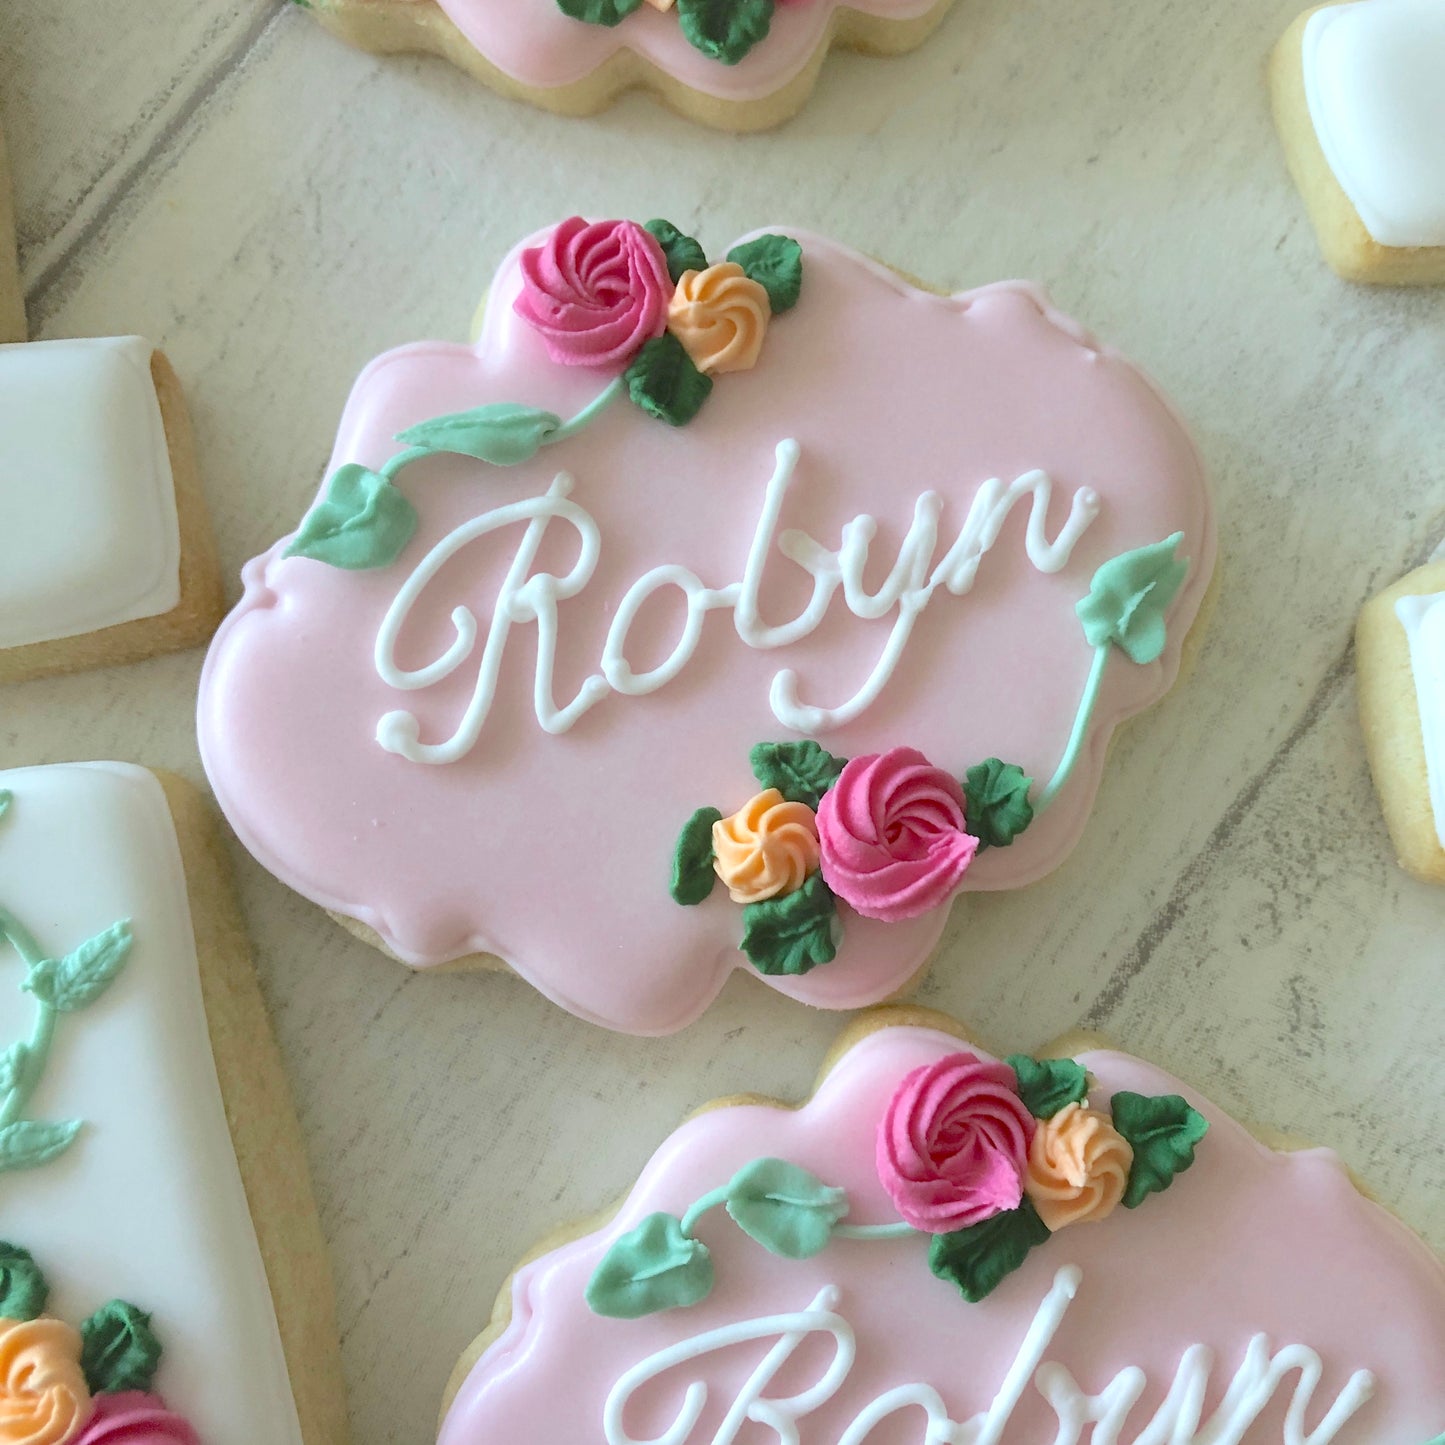 Floral Birthday Biscuits